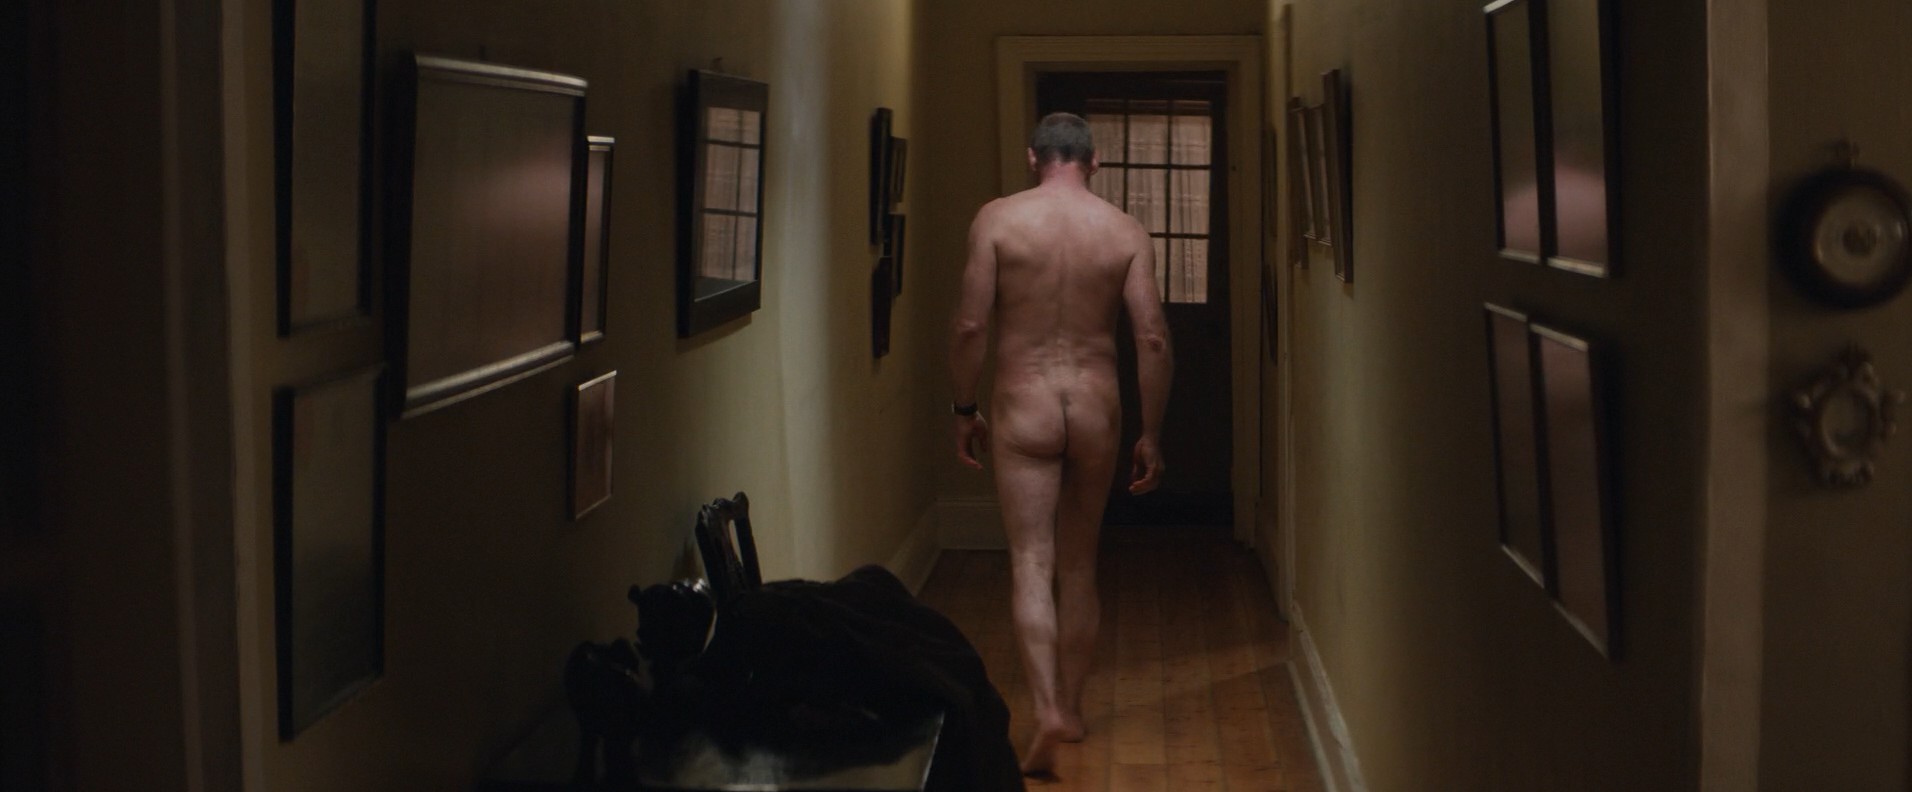 Liam neeson caught walking naked in hotel hallway